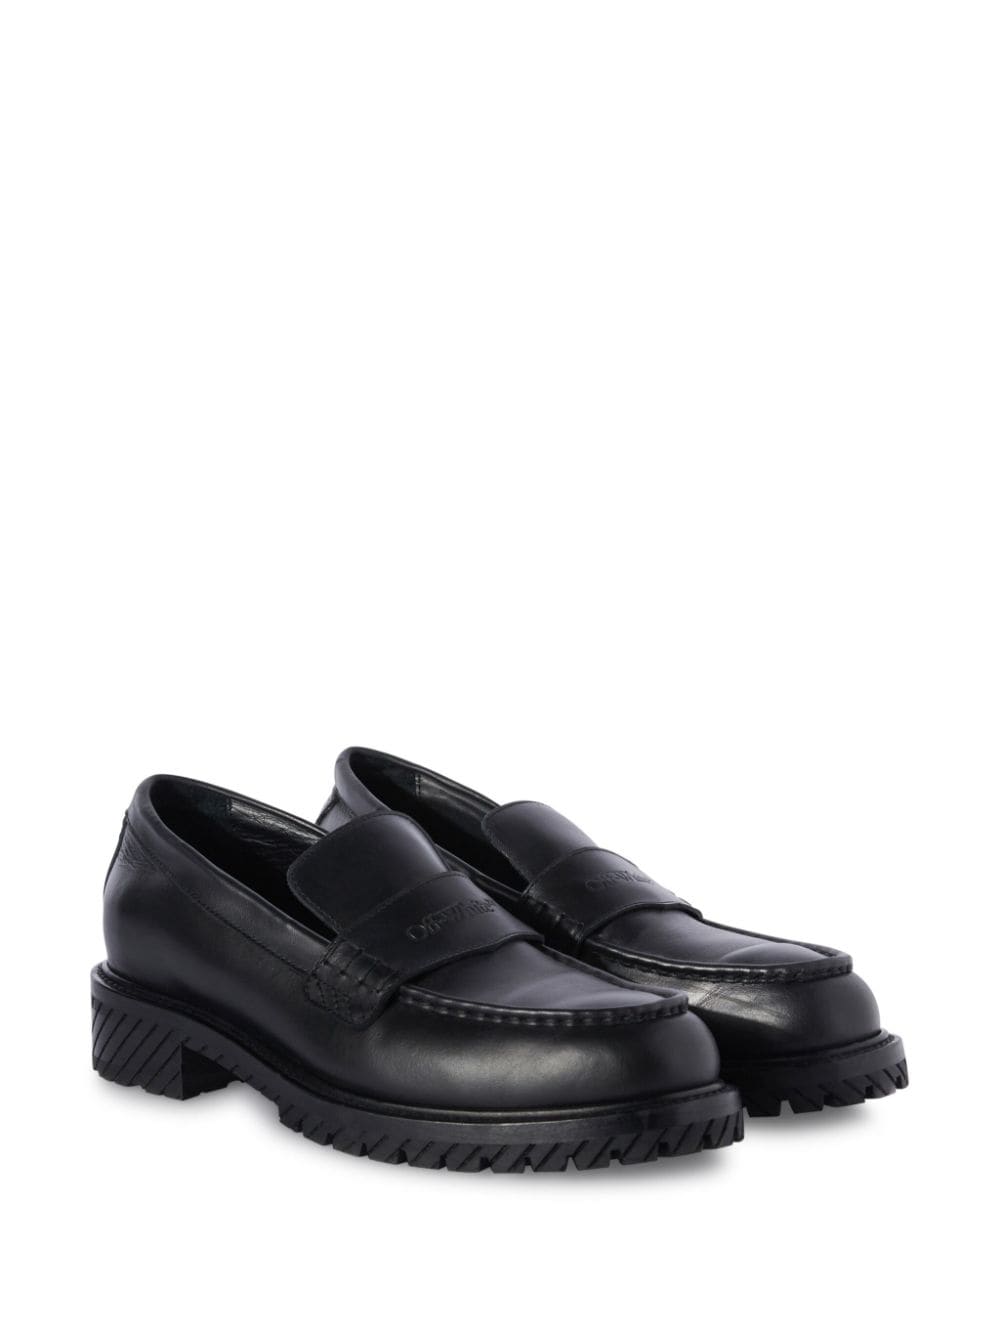 Military logo-debossed leather loafers<BR/><BR/><BR/>